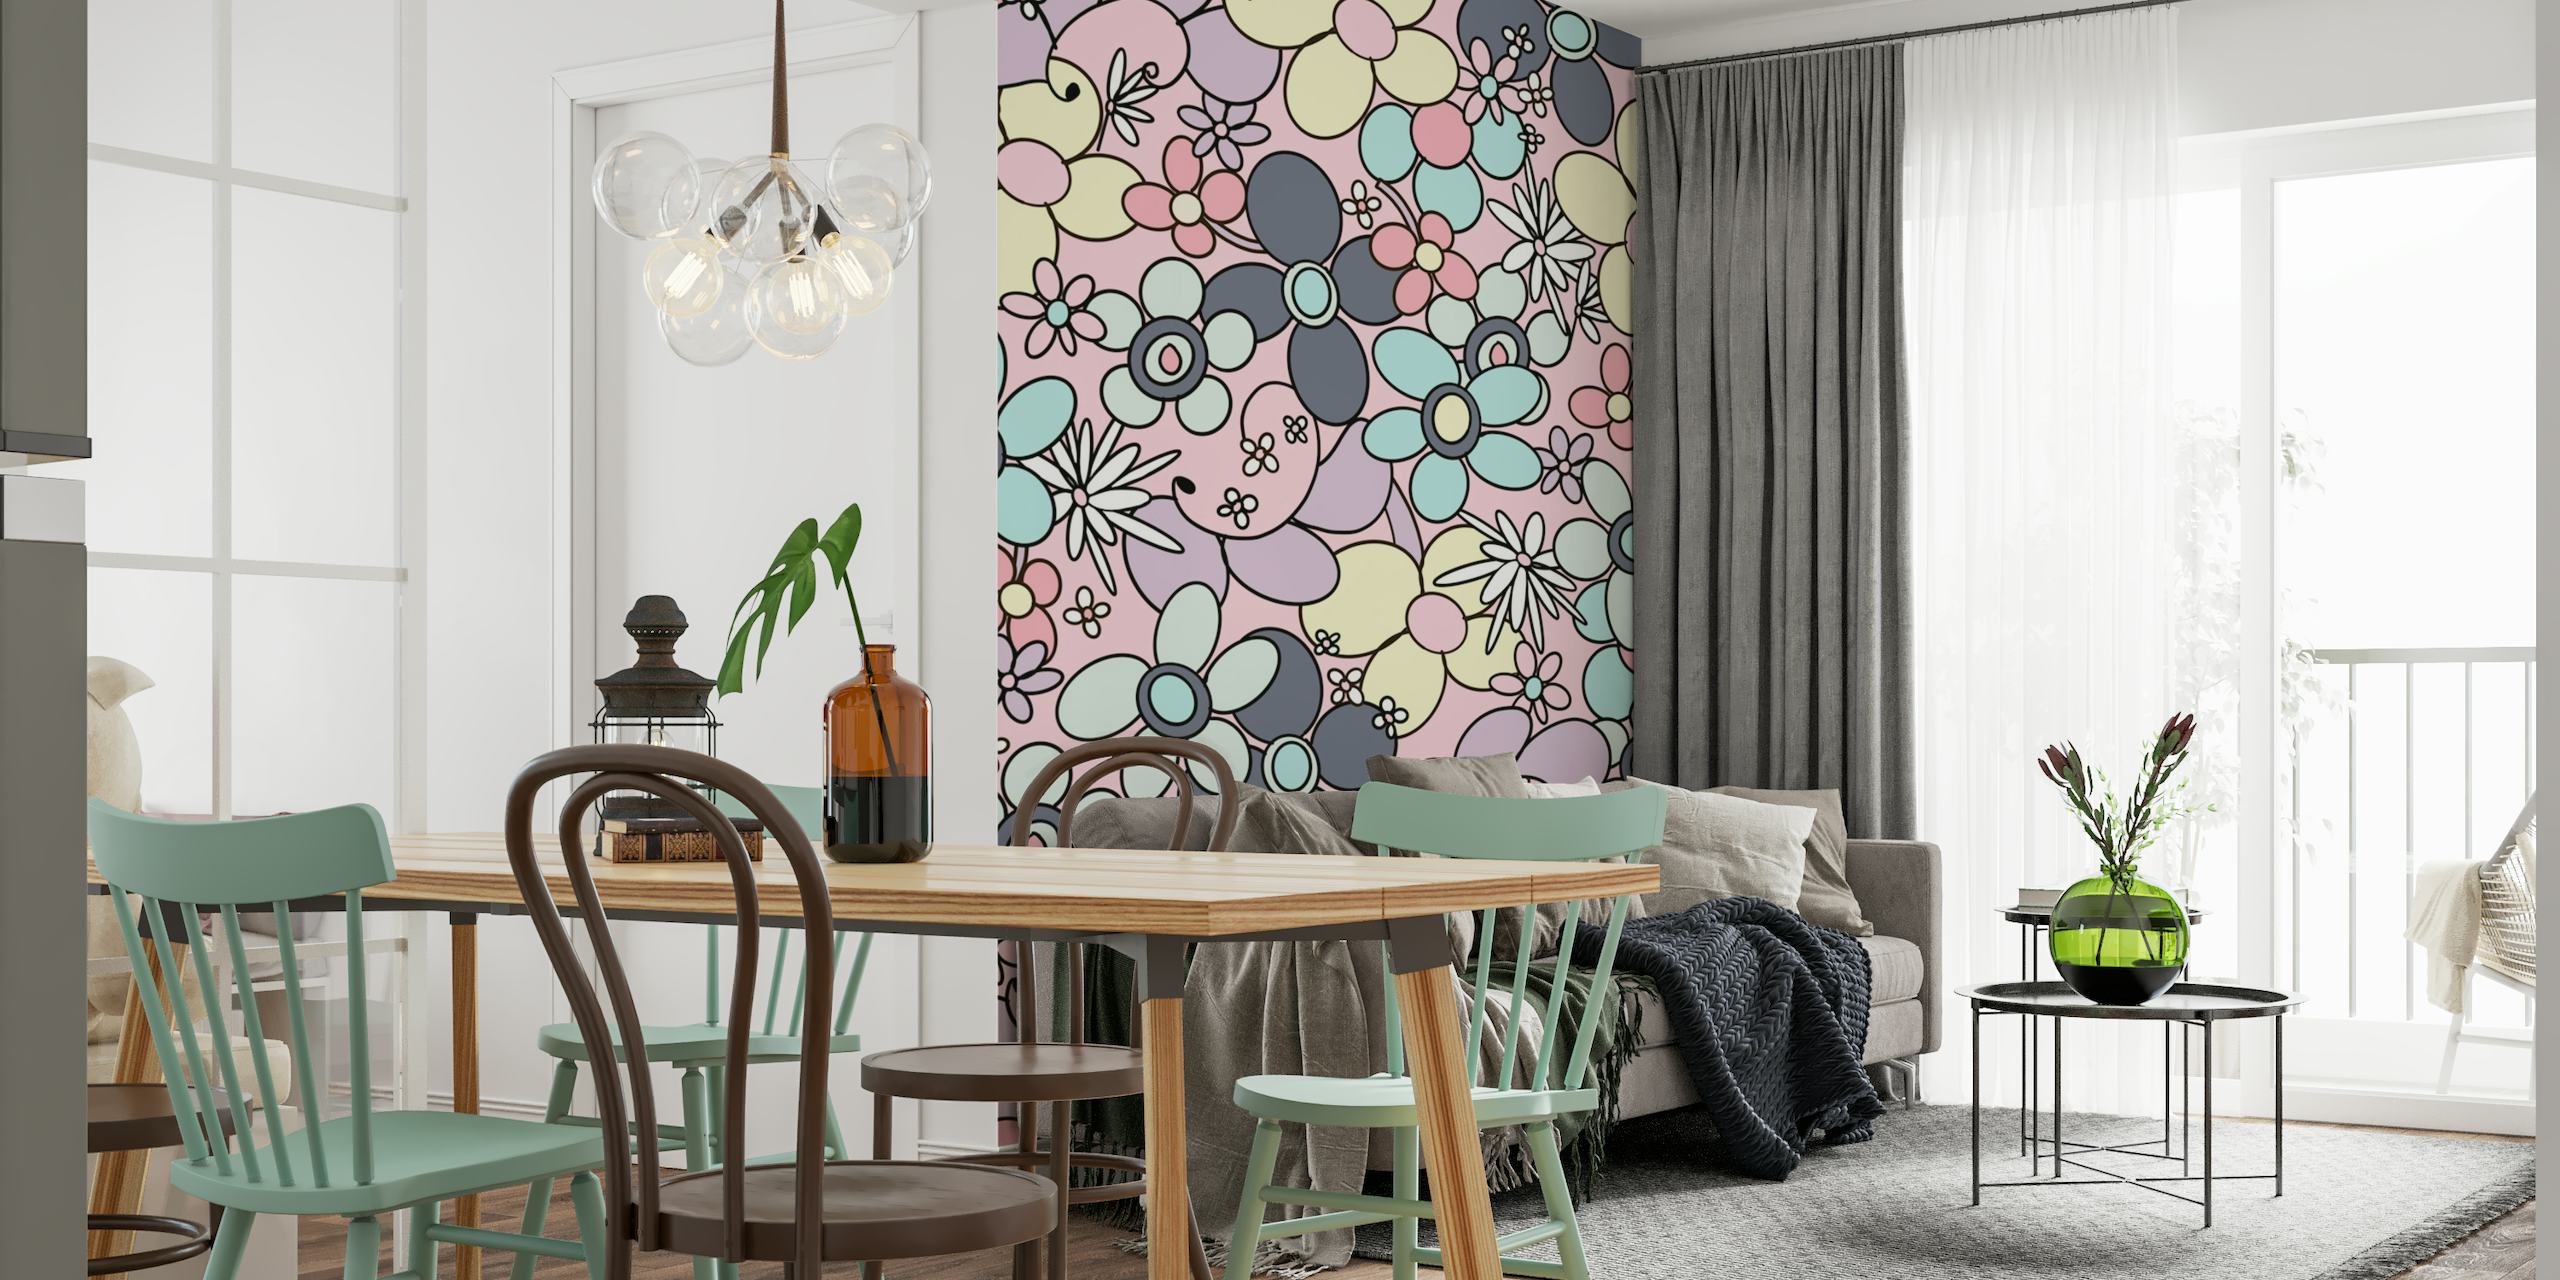 Retro flower pattern wall mural with pastel colors from the 60s and 70s era.